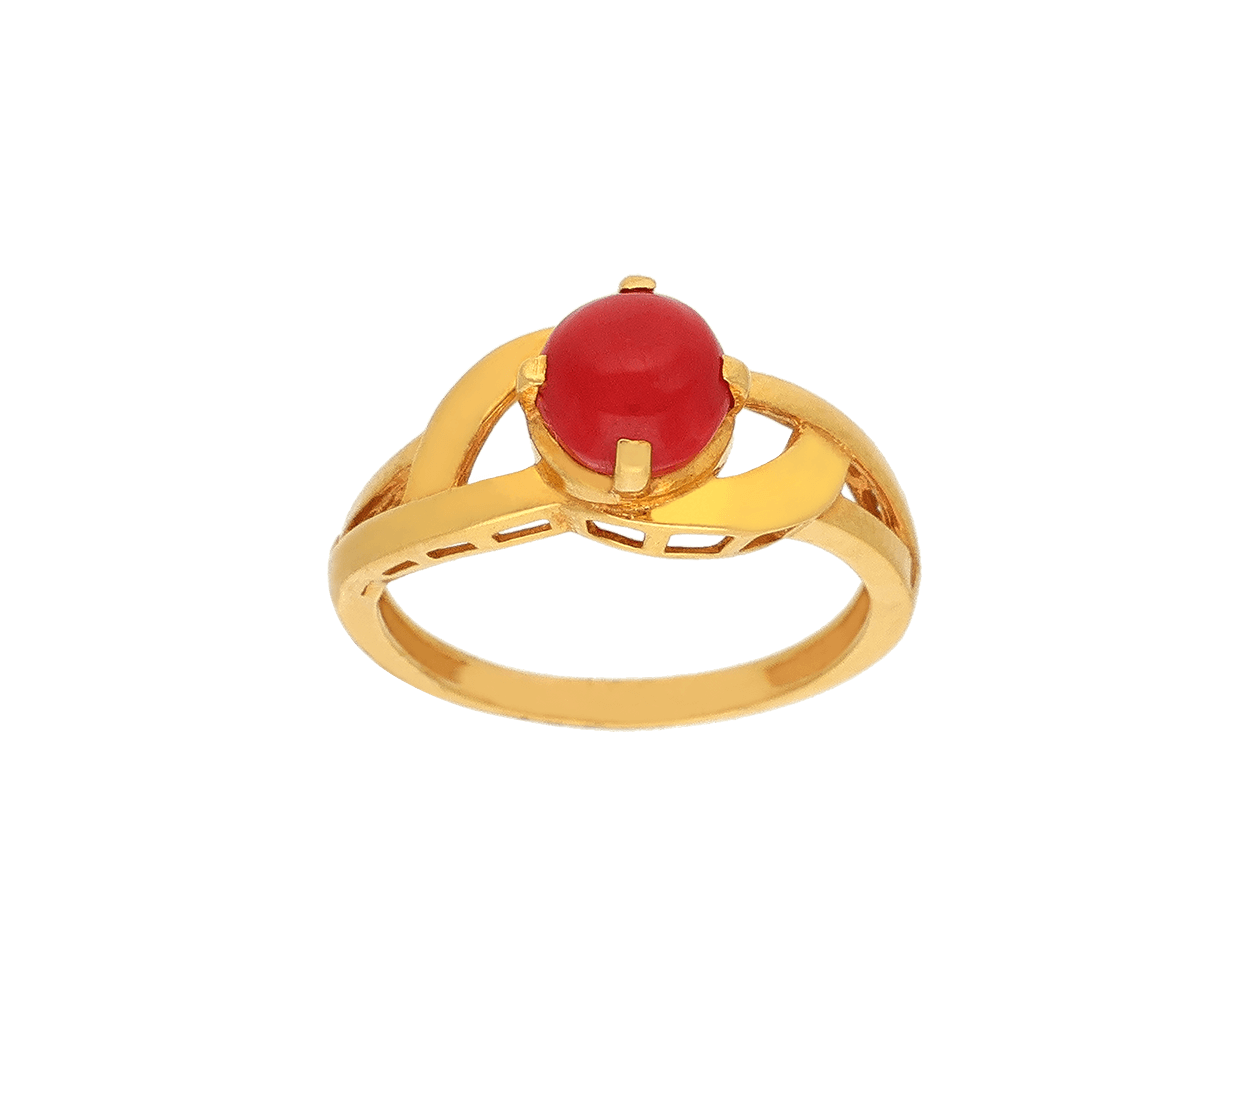 Certified Mediterranean Sea Red Coral(Moonga) Astrology Ring 14k Gold  Plated | eBay